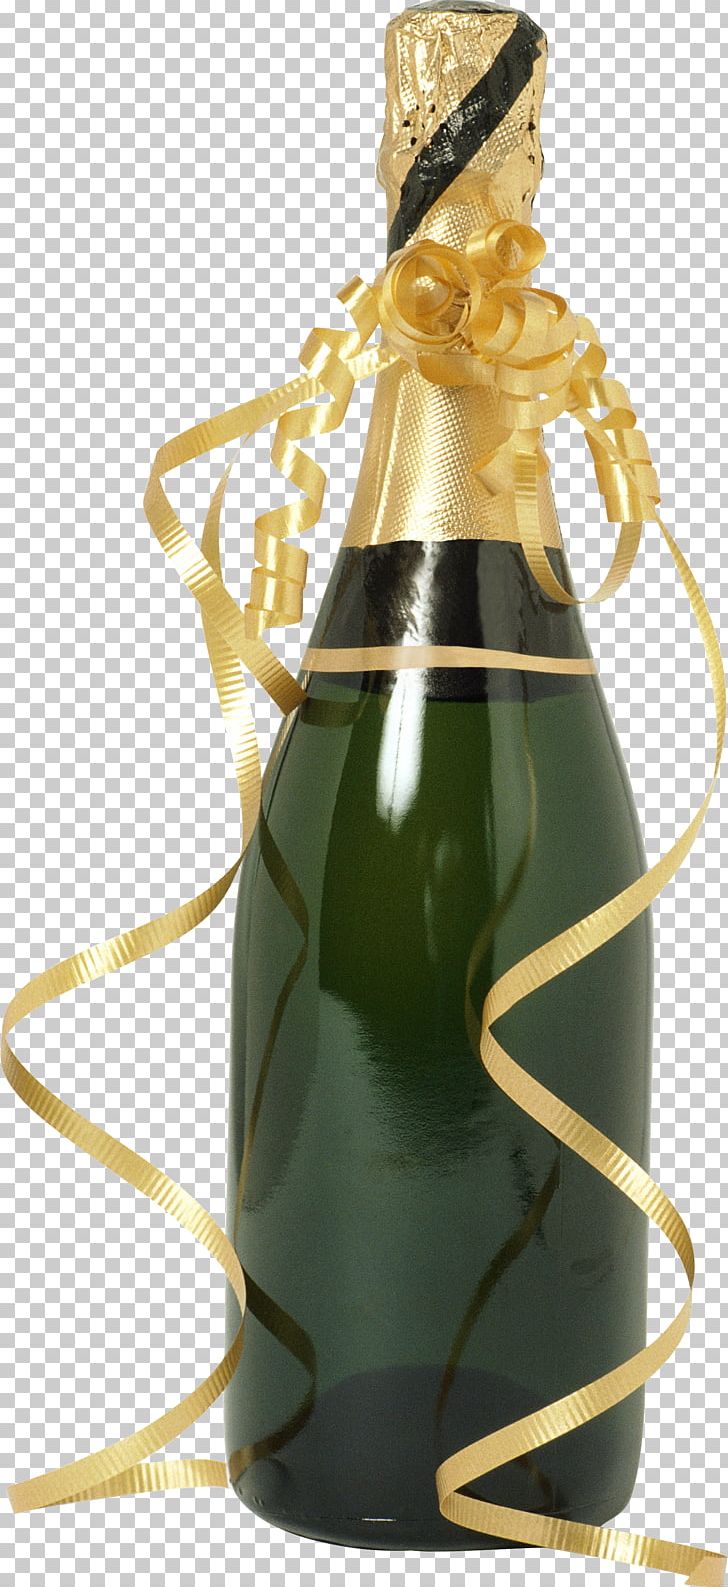 Champagne Wine Bottle PNG, Clipart, Bottle, Champagne, Champagne Glass, Champagne Png Bottle, Champagne Wine Free PNG Download